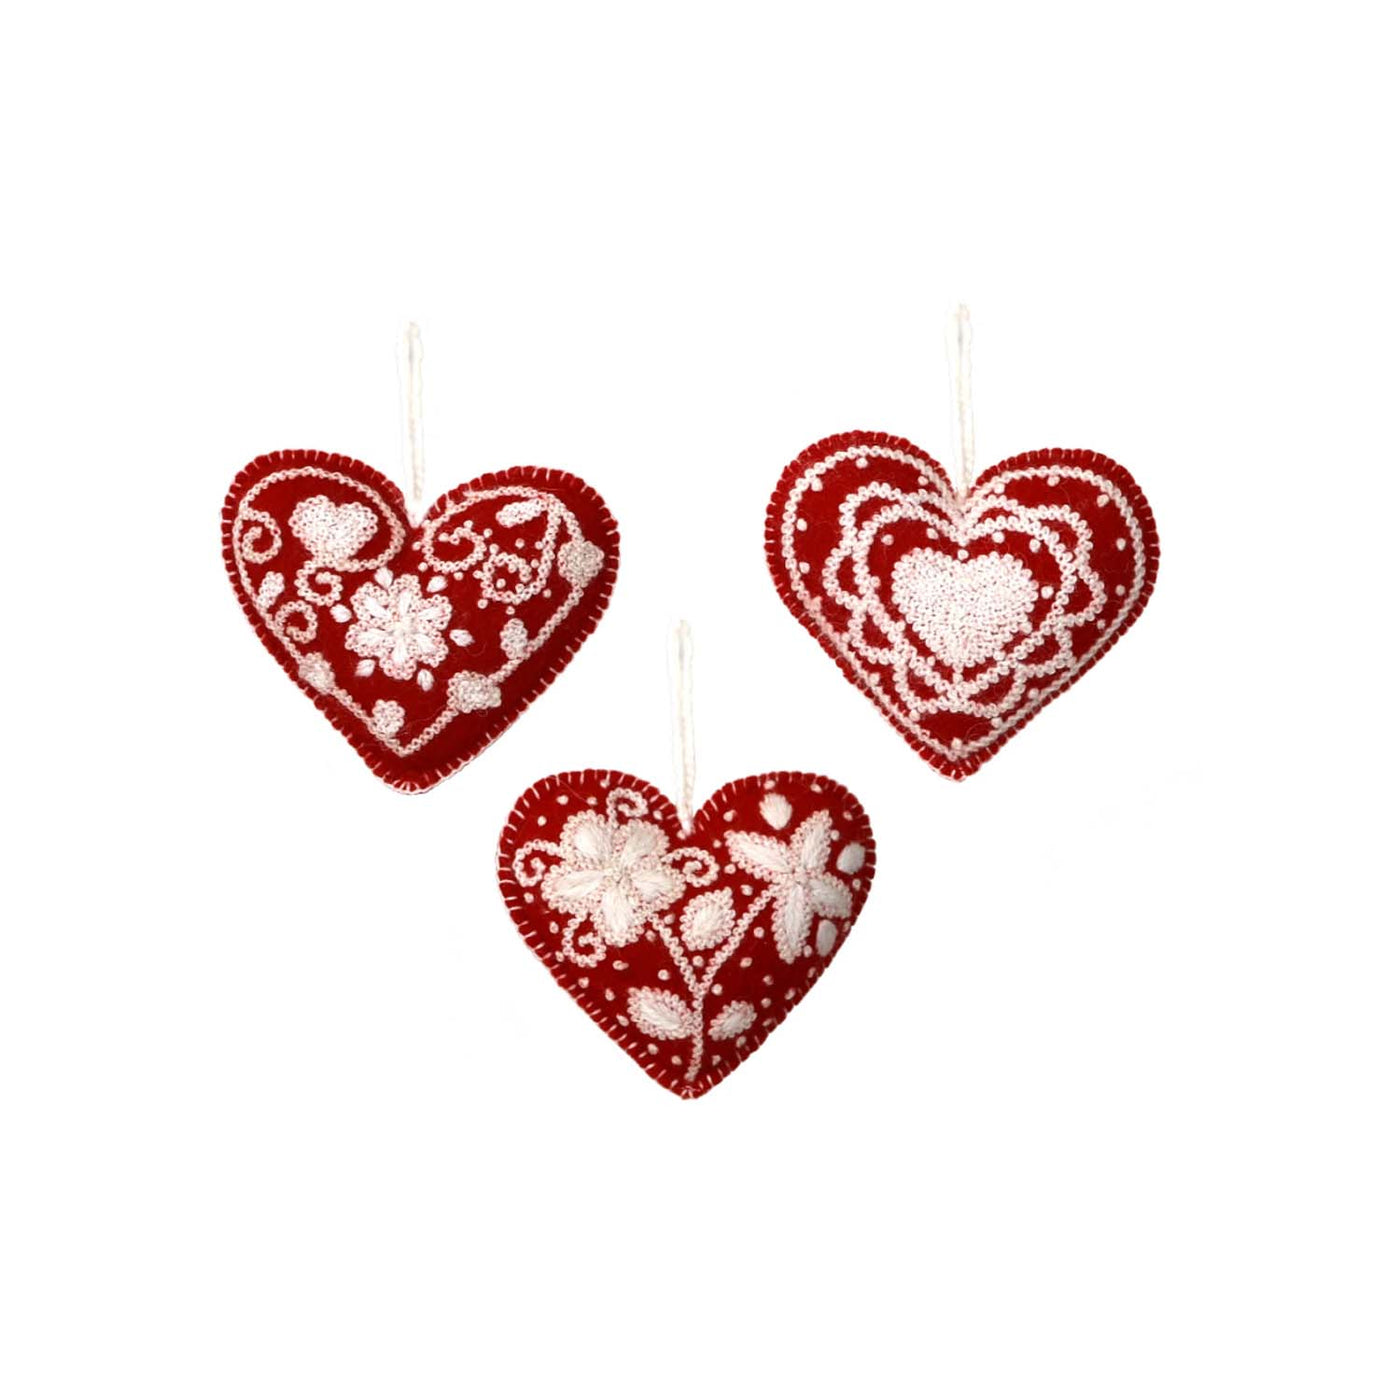 three red embroidered hearts